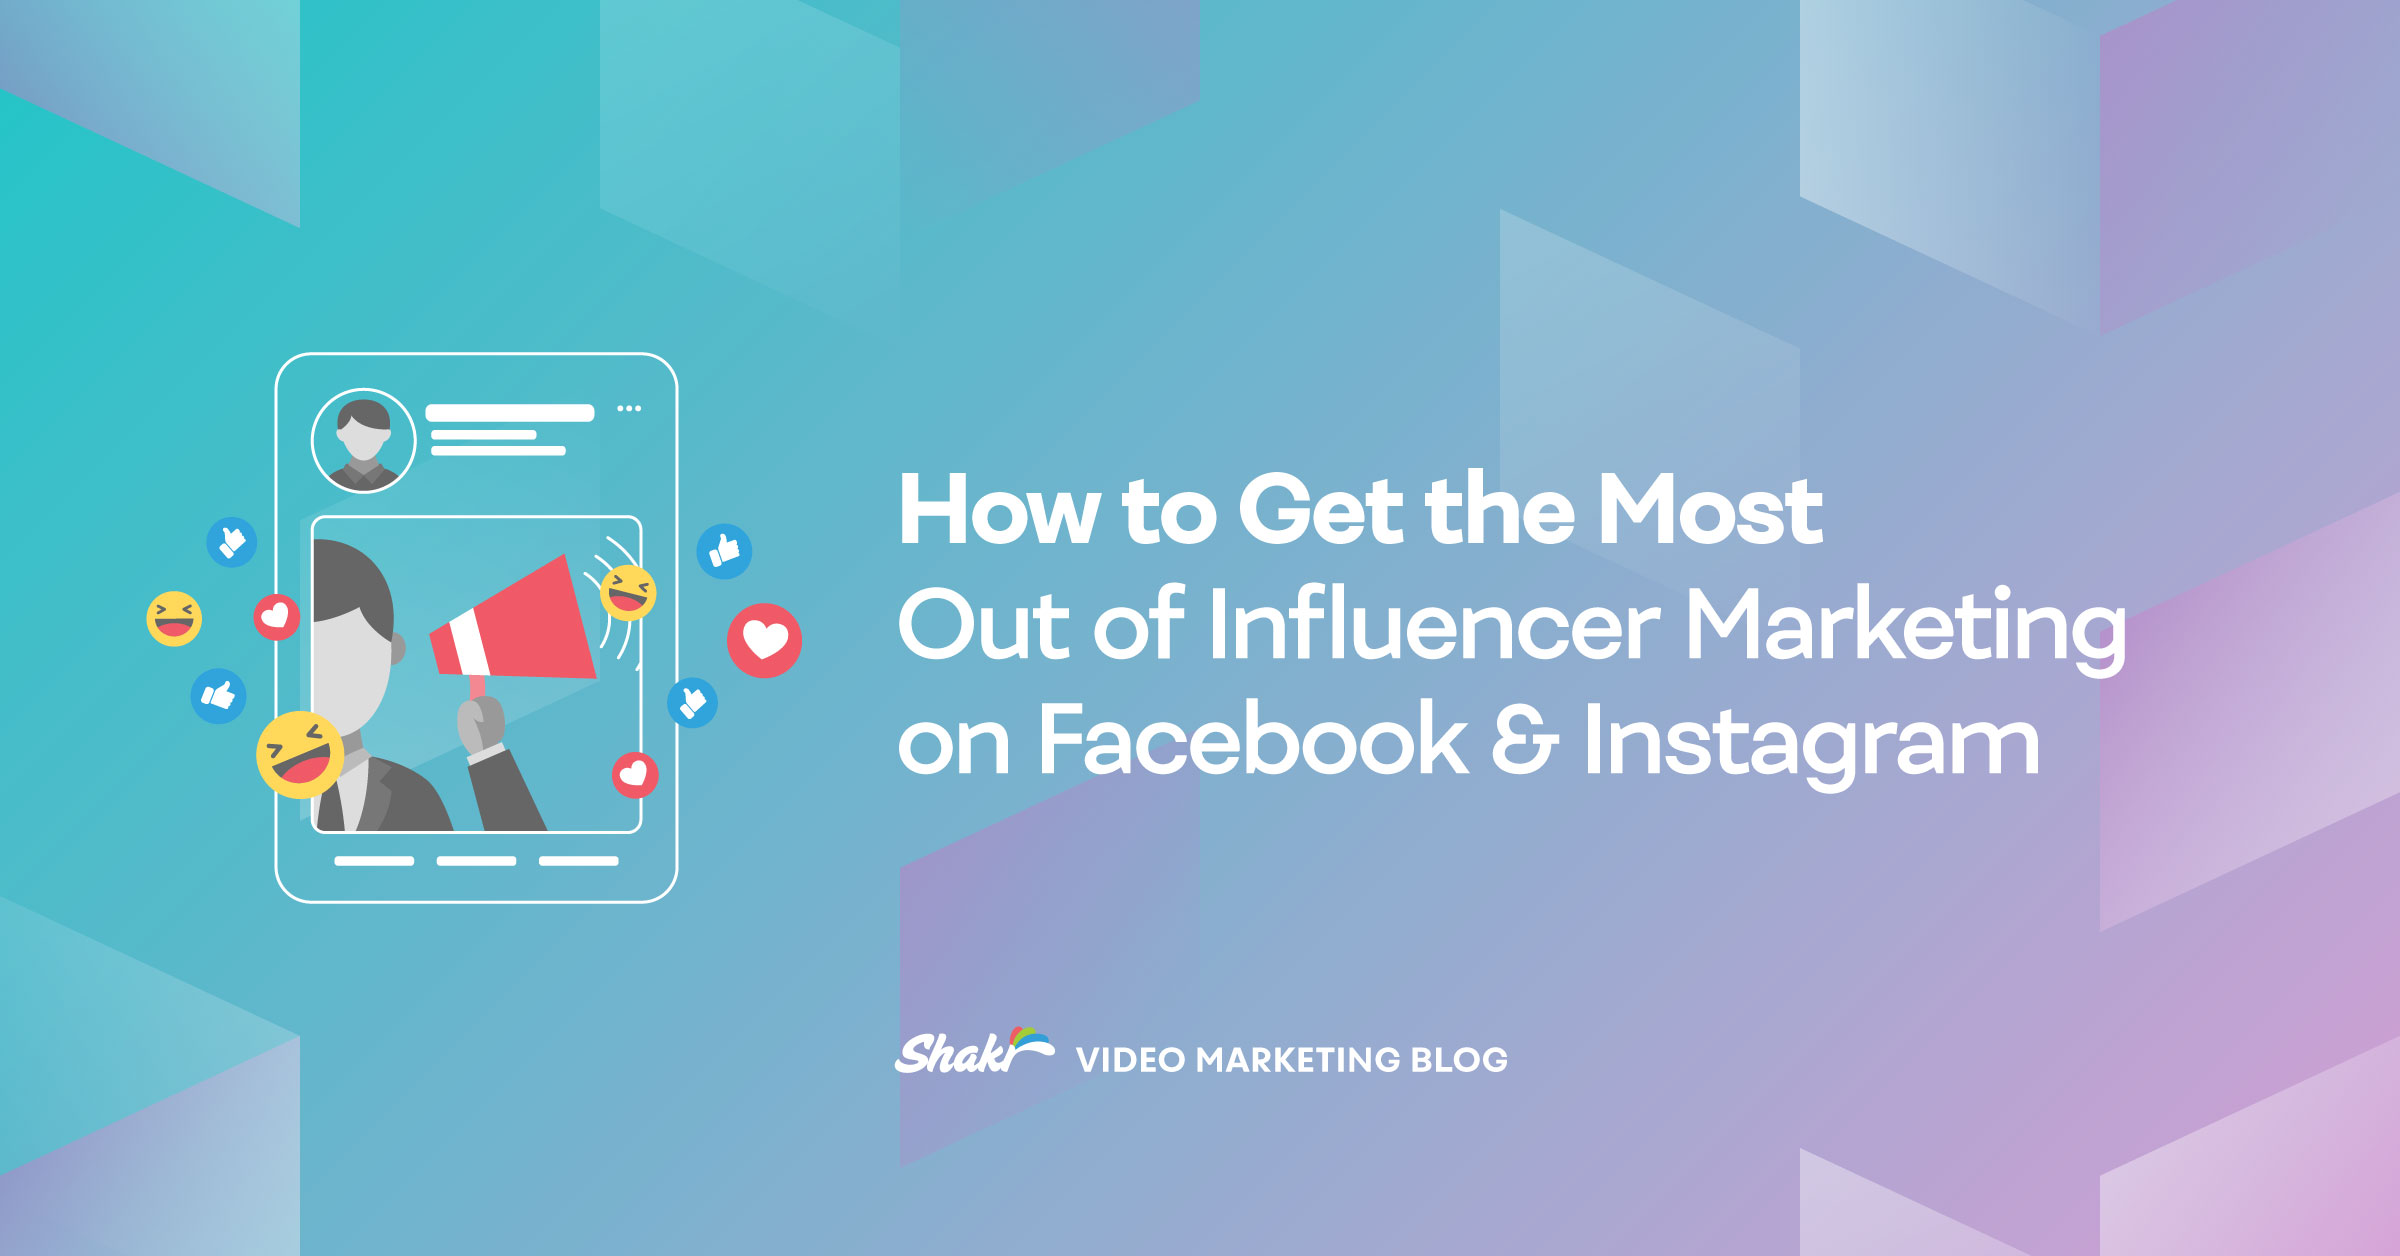 How to Get the Most Out of Influencer Marketing on Facebook & Instagram ...